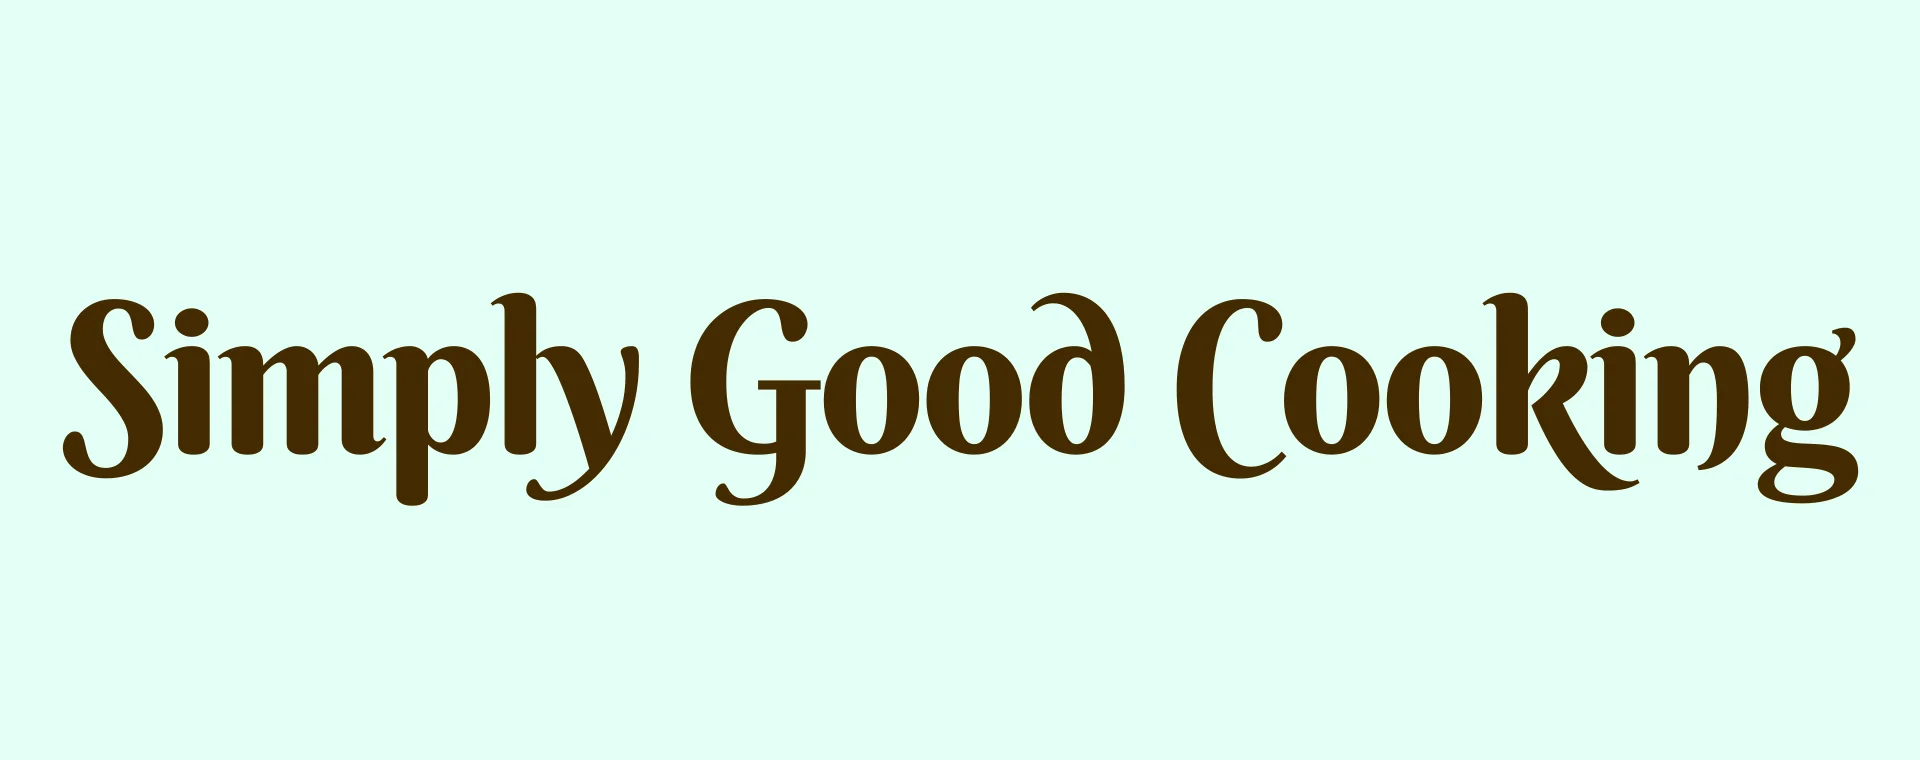 Simply Good Cooking Banner